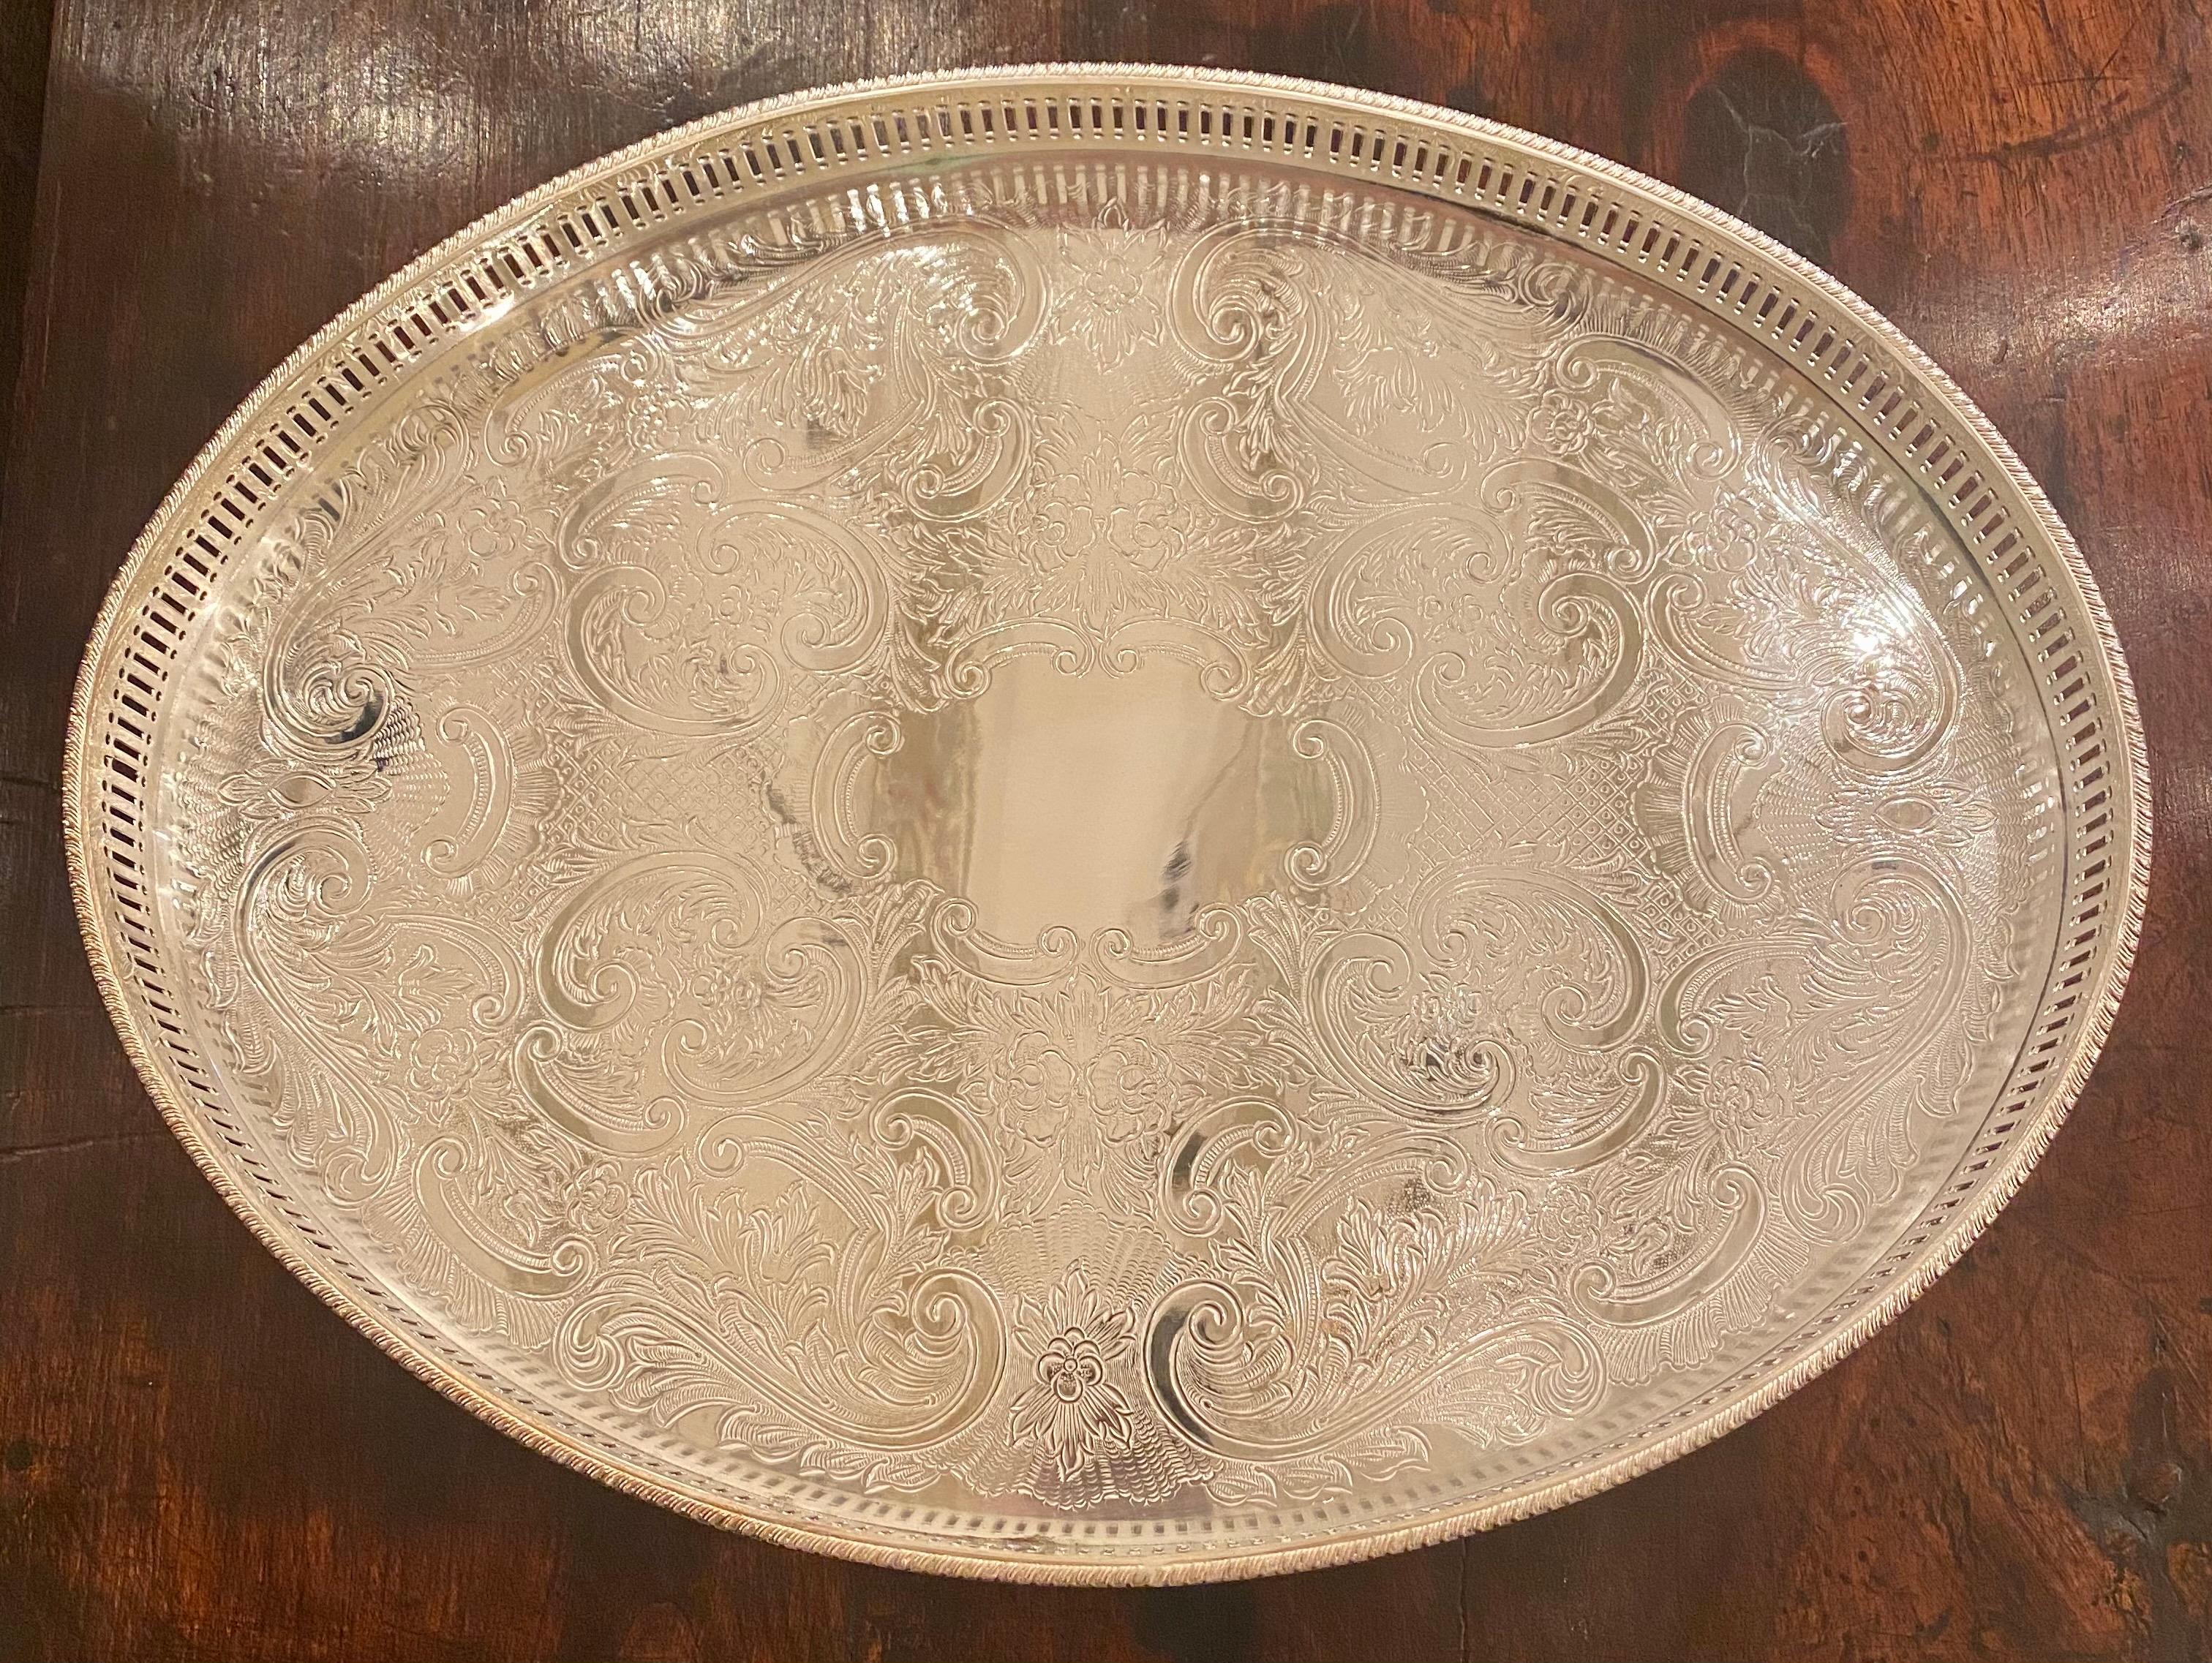 Handmade and Engraved English Silver Plated Footed Oval Tray with Gallery 1